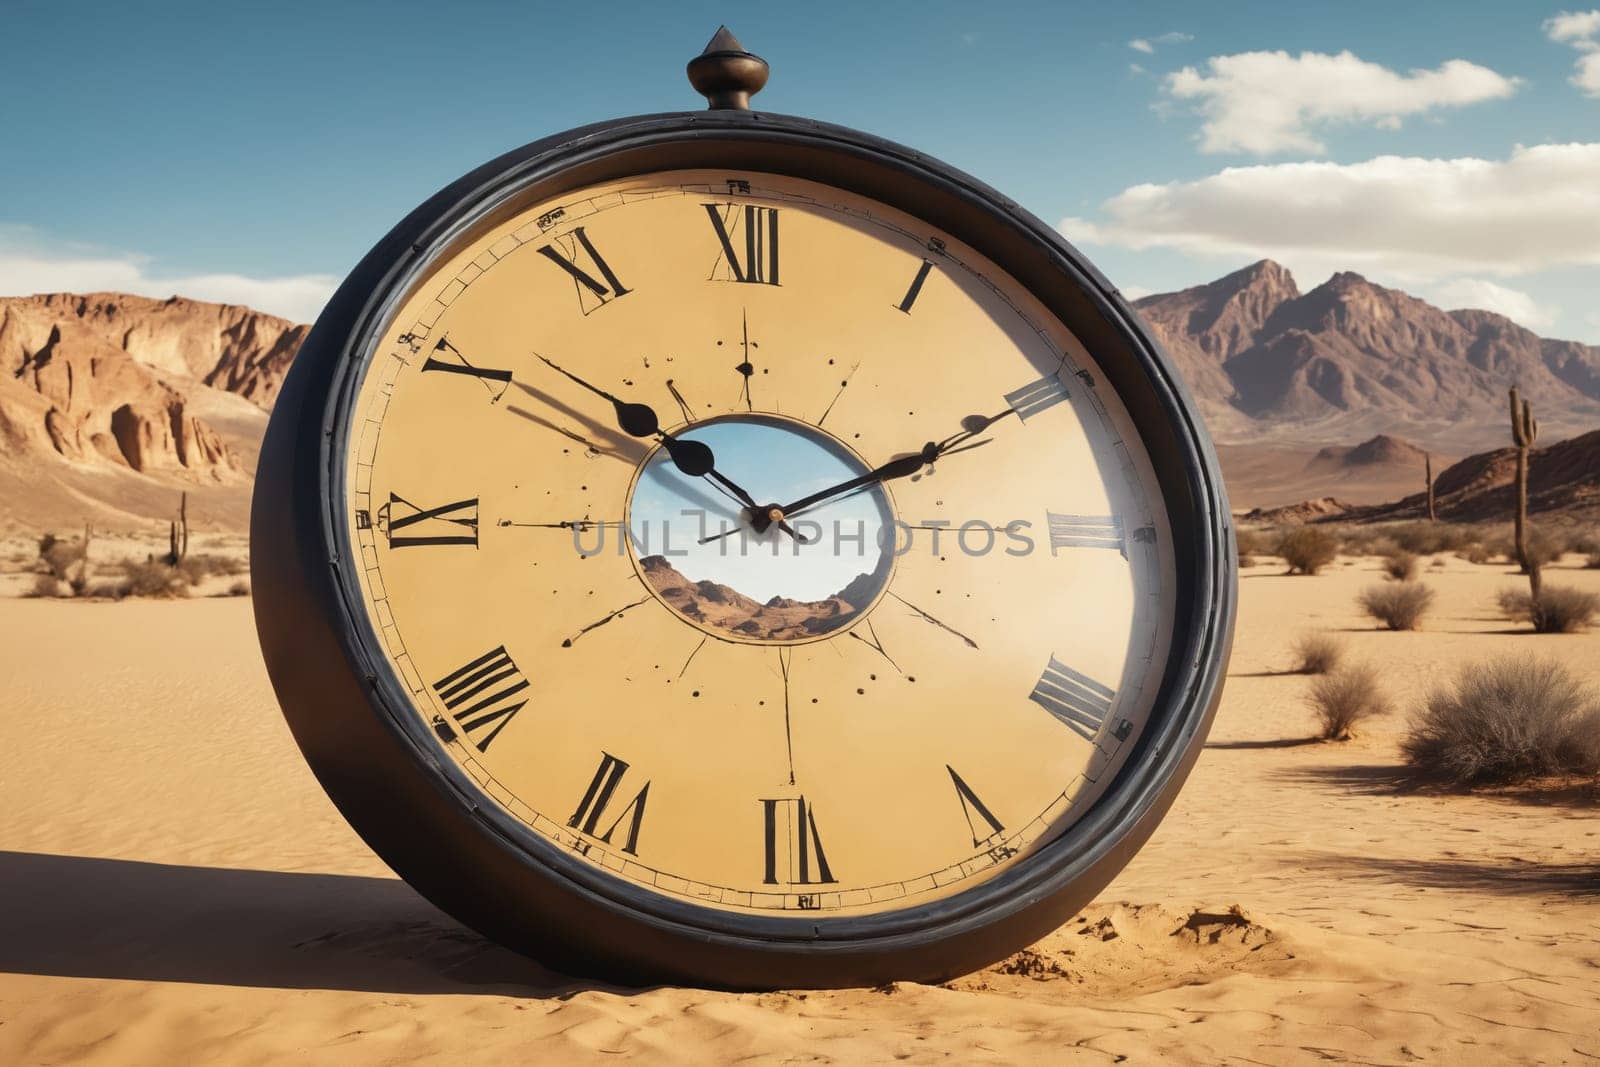 This image juxtaposes the timeless desert with the tangible countdown of clock numbers.